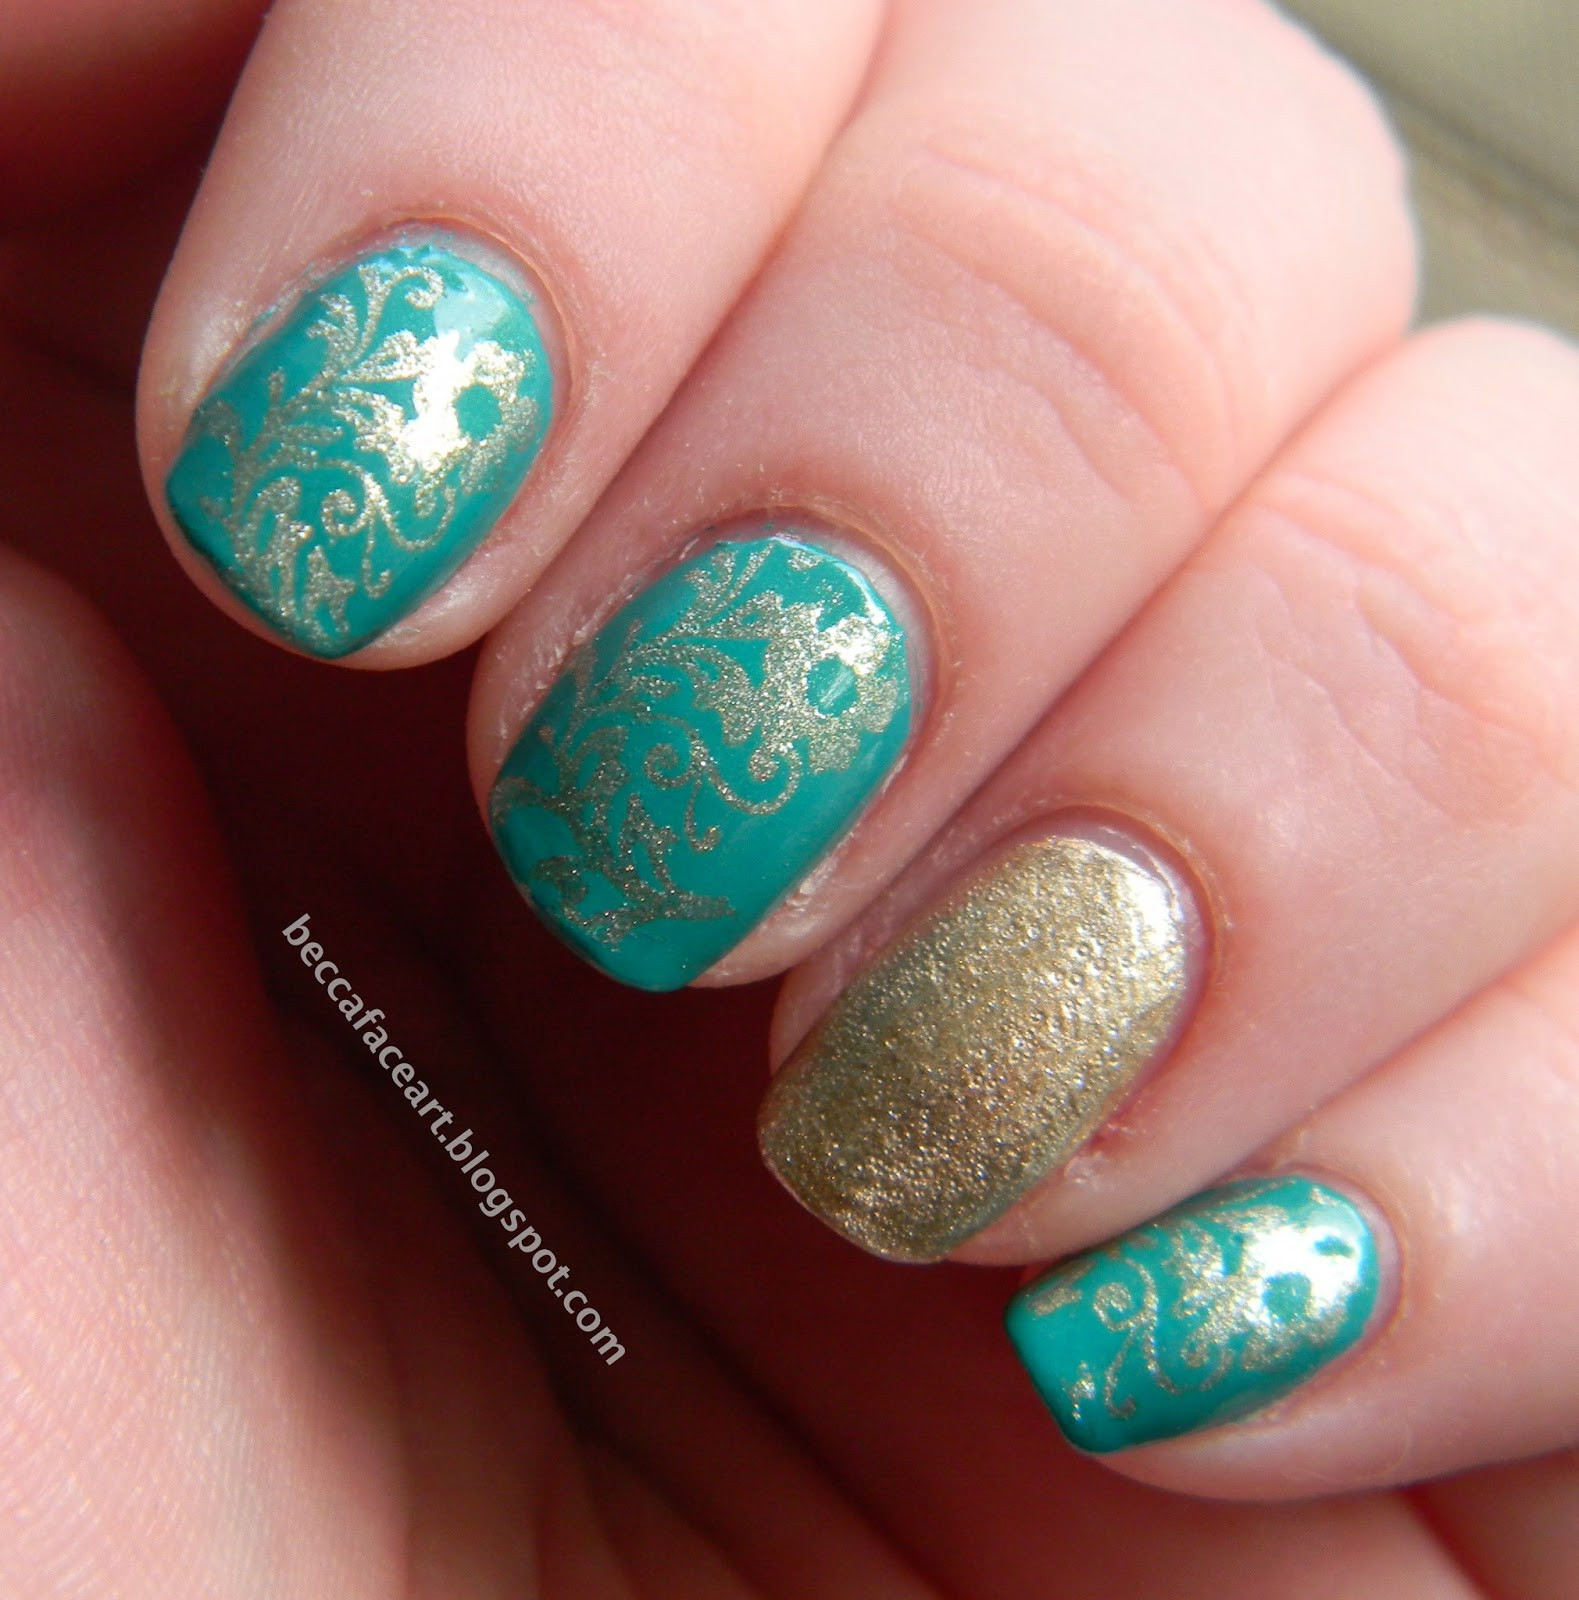 Turquoise Nail Designs
 Becca Face Nail Art Turquoise and Gold Flower Nails